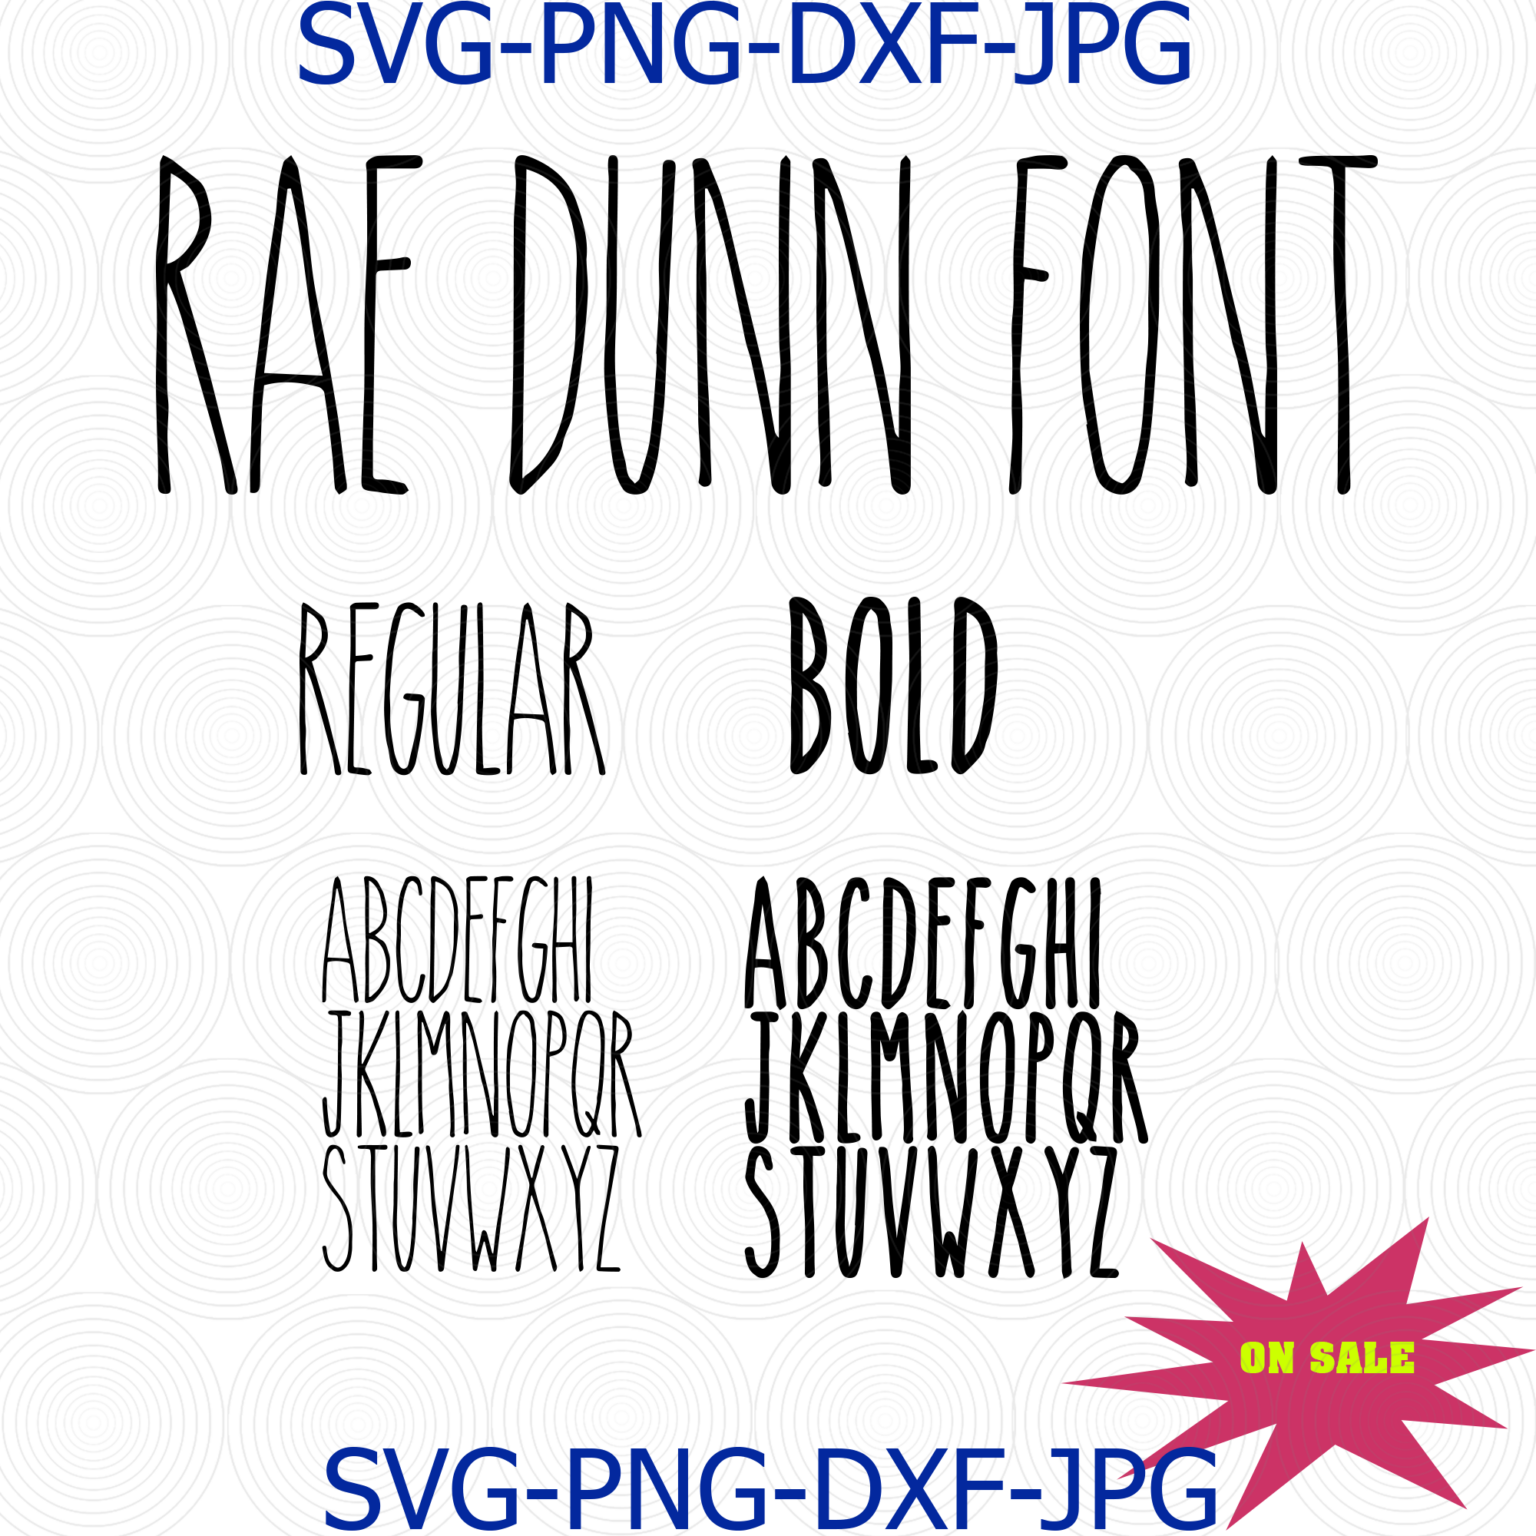 Rae Dunn Font svg png cricut - Welcome to our shop